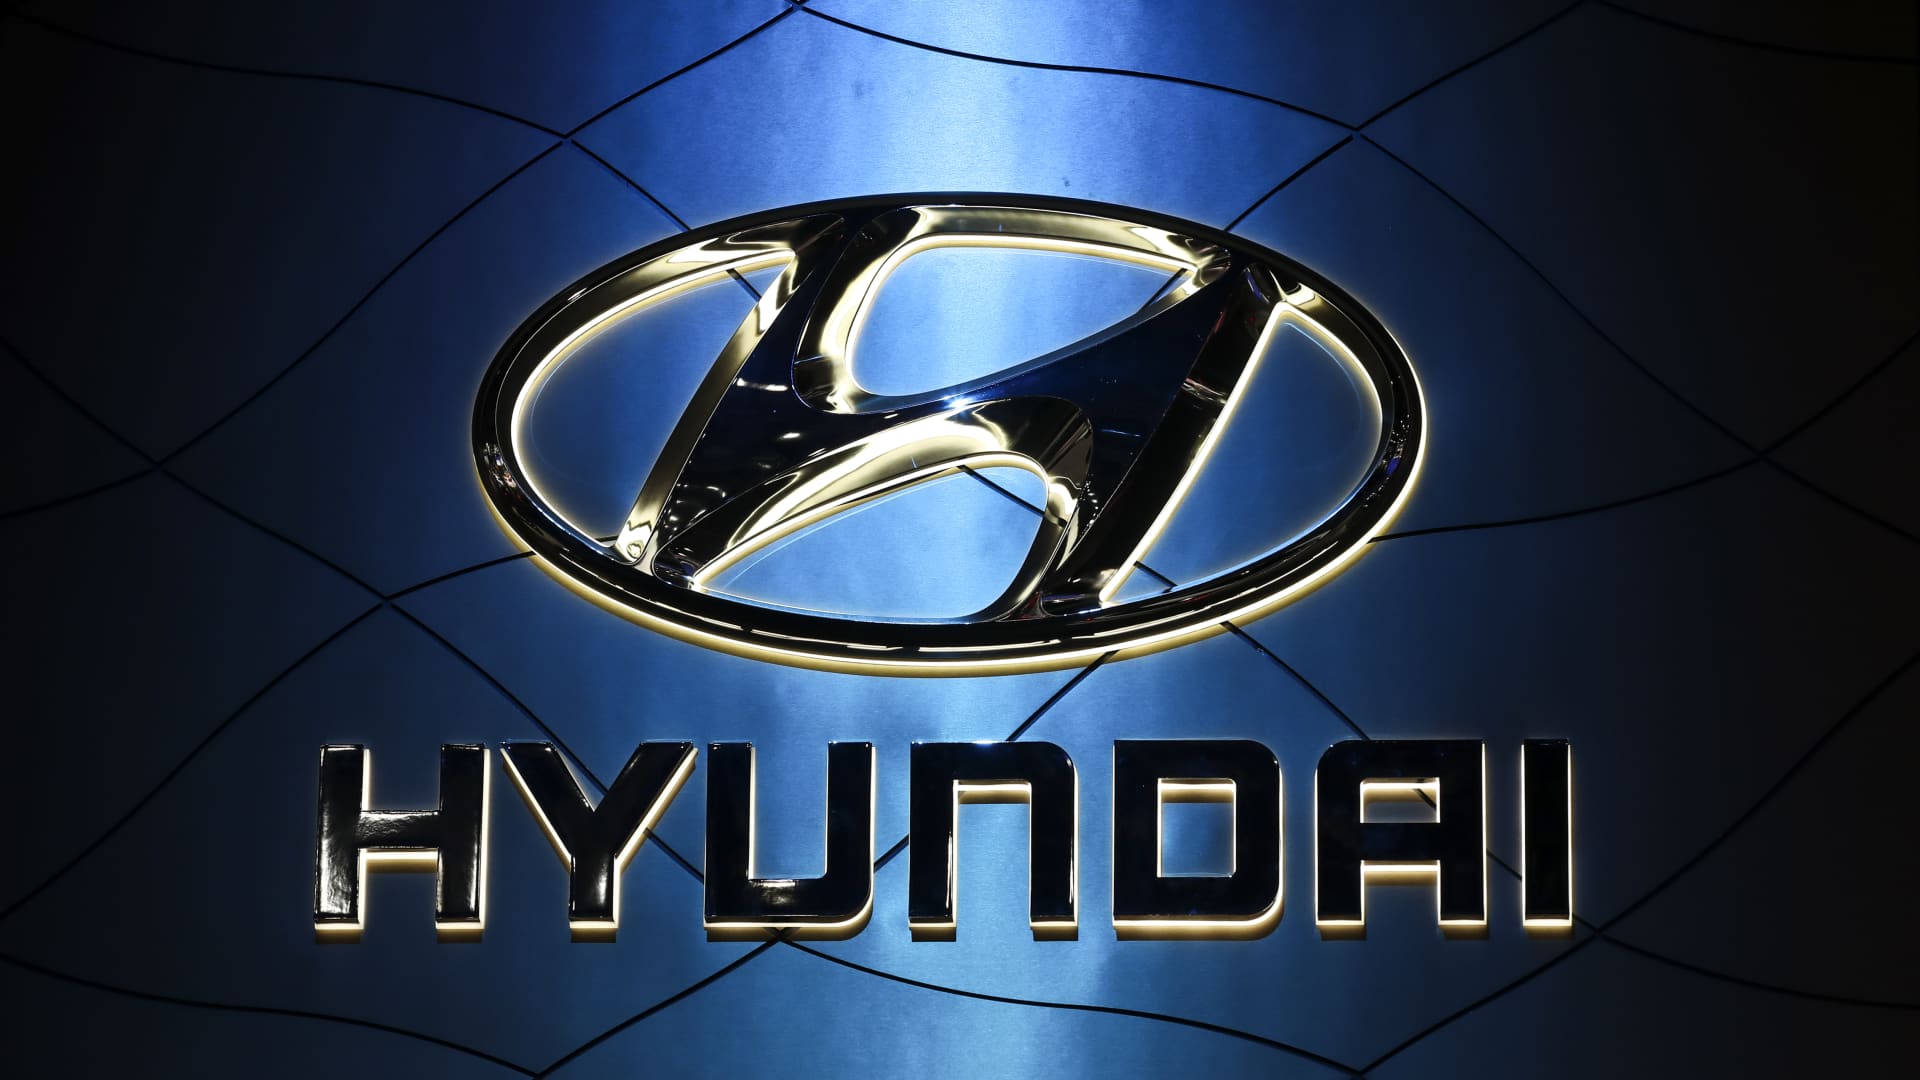 Hyundai is planning a $ 5 billion investment in the United States in mobility technology